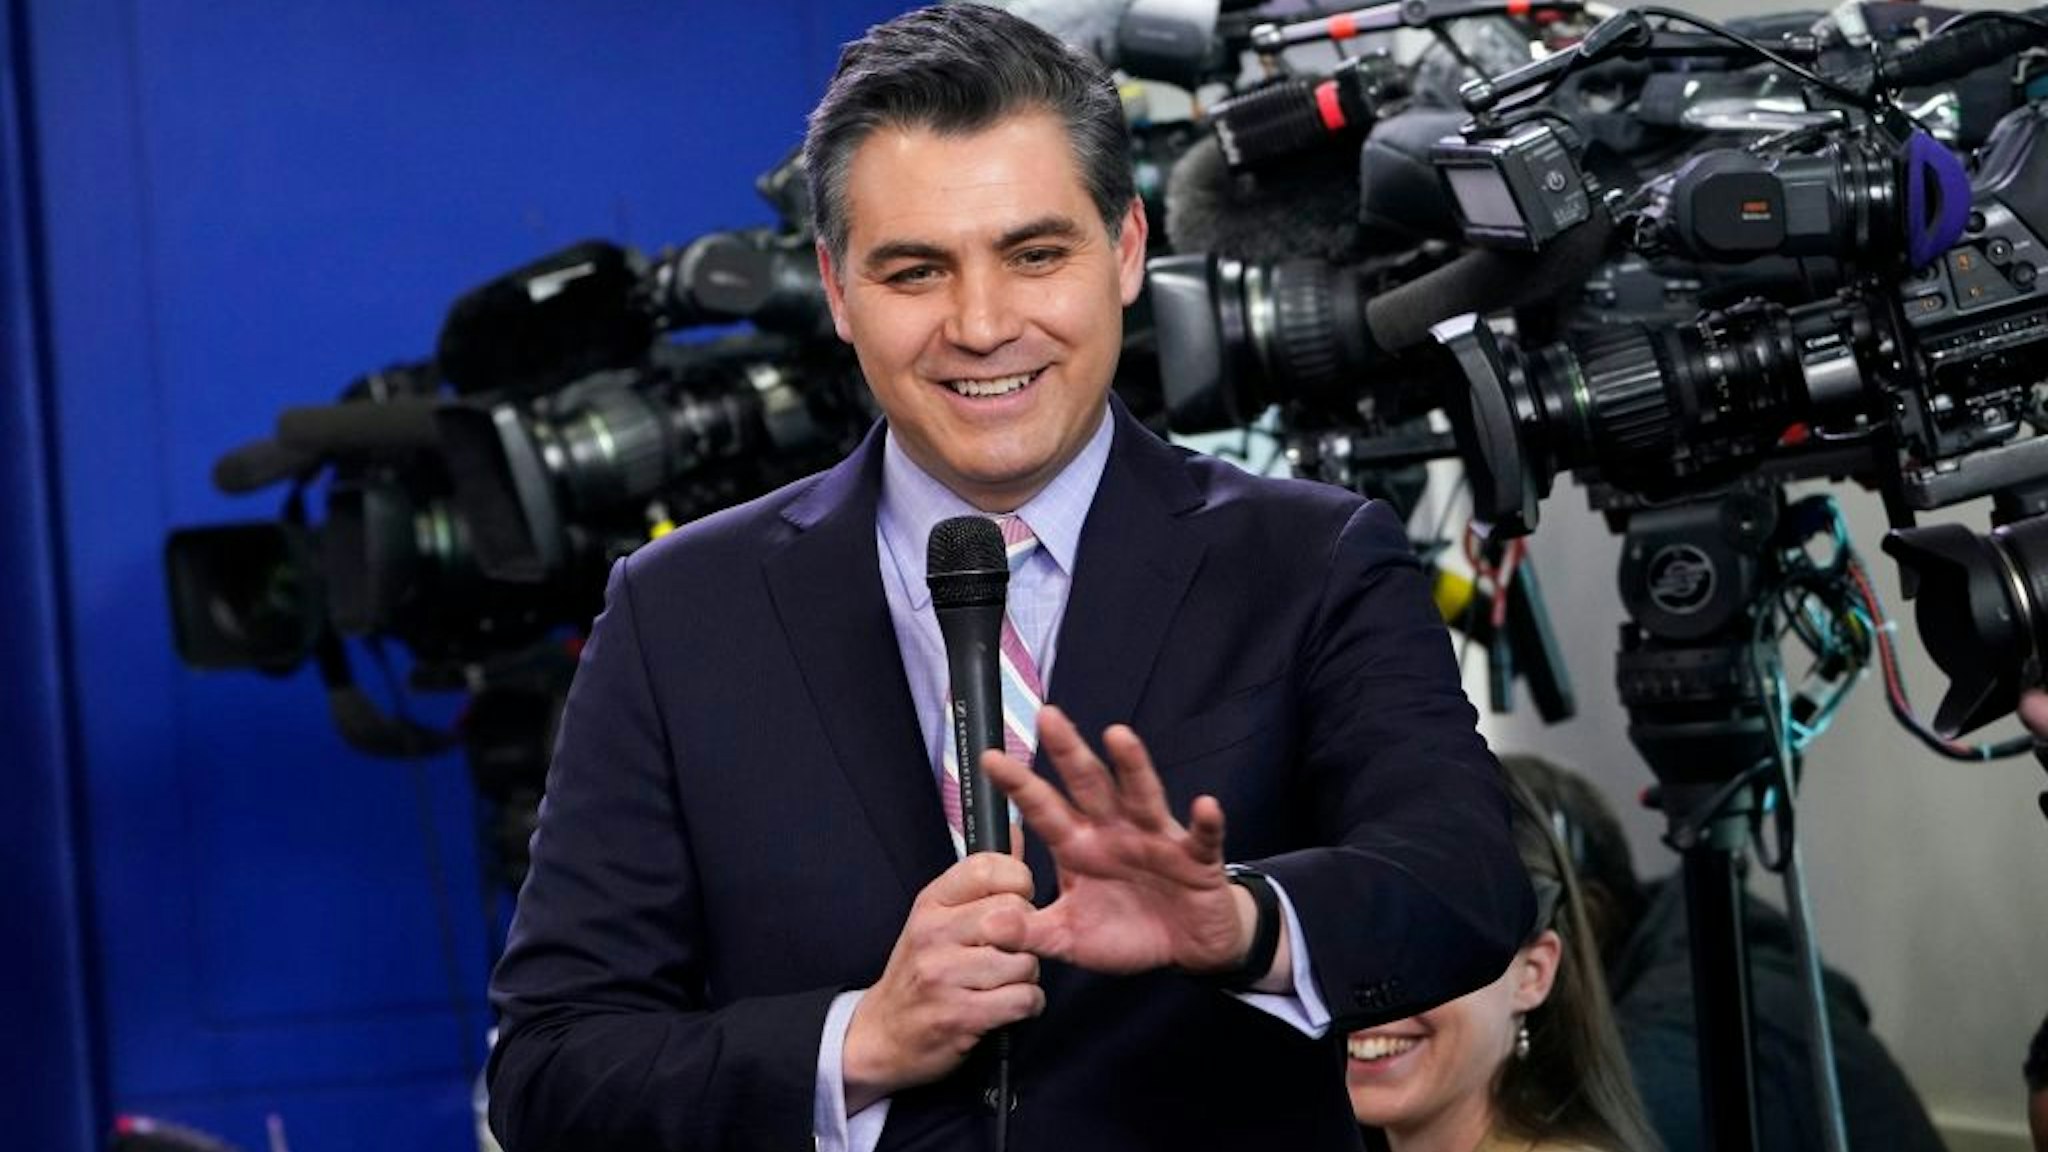 A February 8, 2018 photo shows CNN chief White House correspondent Jim Acosta before the start of a briefing in the Brady Briefing Room of the White House in Washington, DC. - The White House on November 7, 2018, suspended the press pass of a CNN reporter who earlier sparred with Donald Trump at a news conference, in which the US president branded the journalist an "enemy of the people." An association representing the White House press corps dubbed the Trump administration's revocation of a CNN reporter's credentials "out of line" and "unacceptable." (Photo by MANDEL NGAN / AFP) (Photo by MANDEL NGAN/AFP via Getty Images)